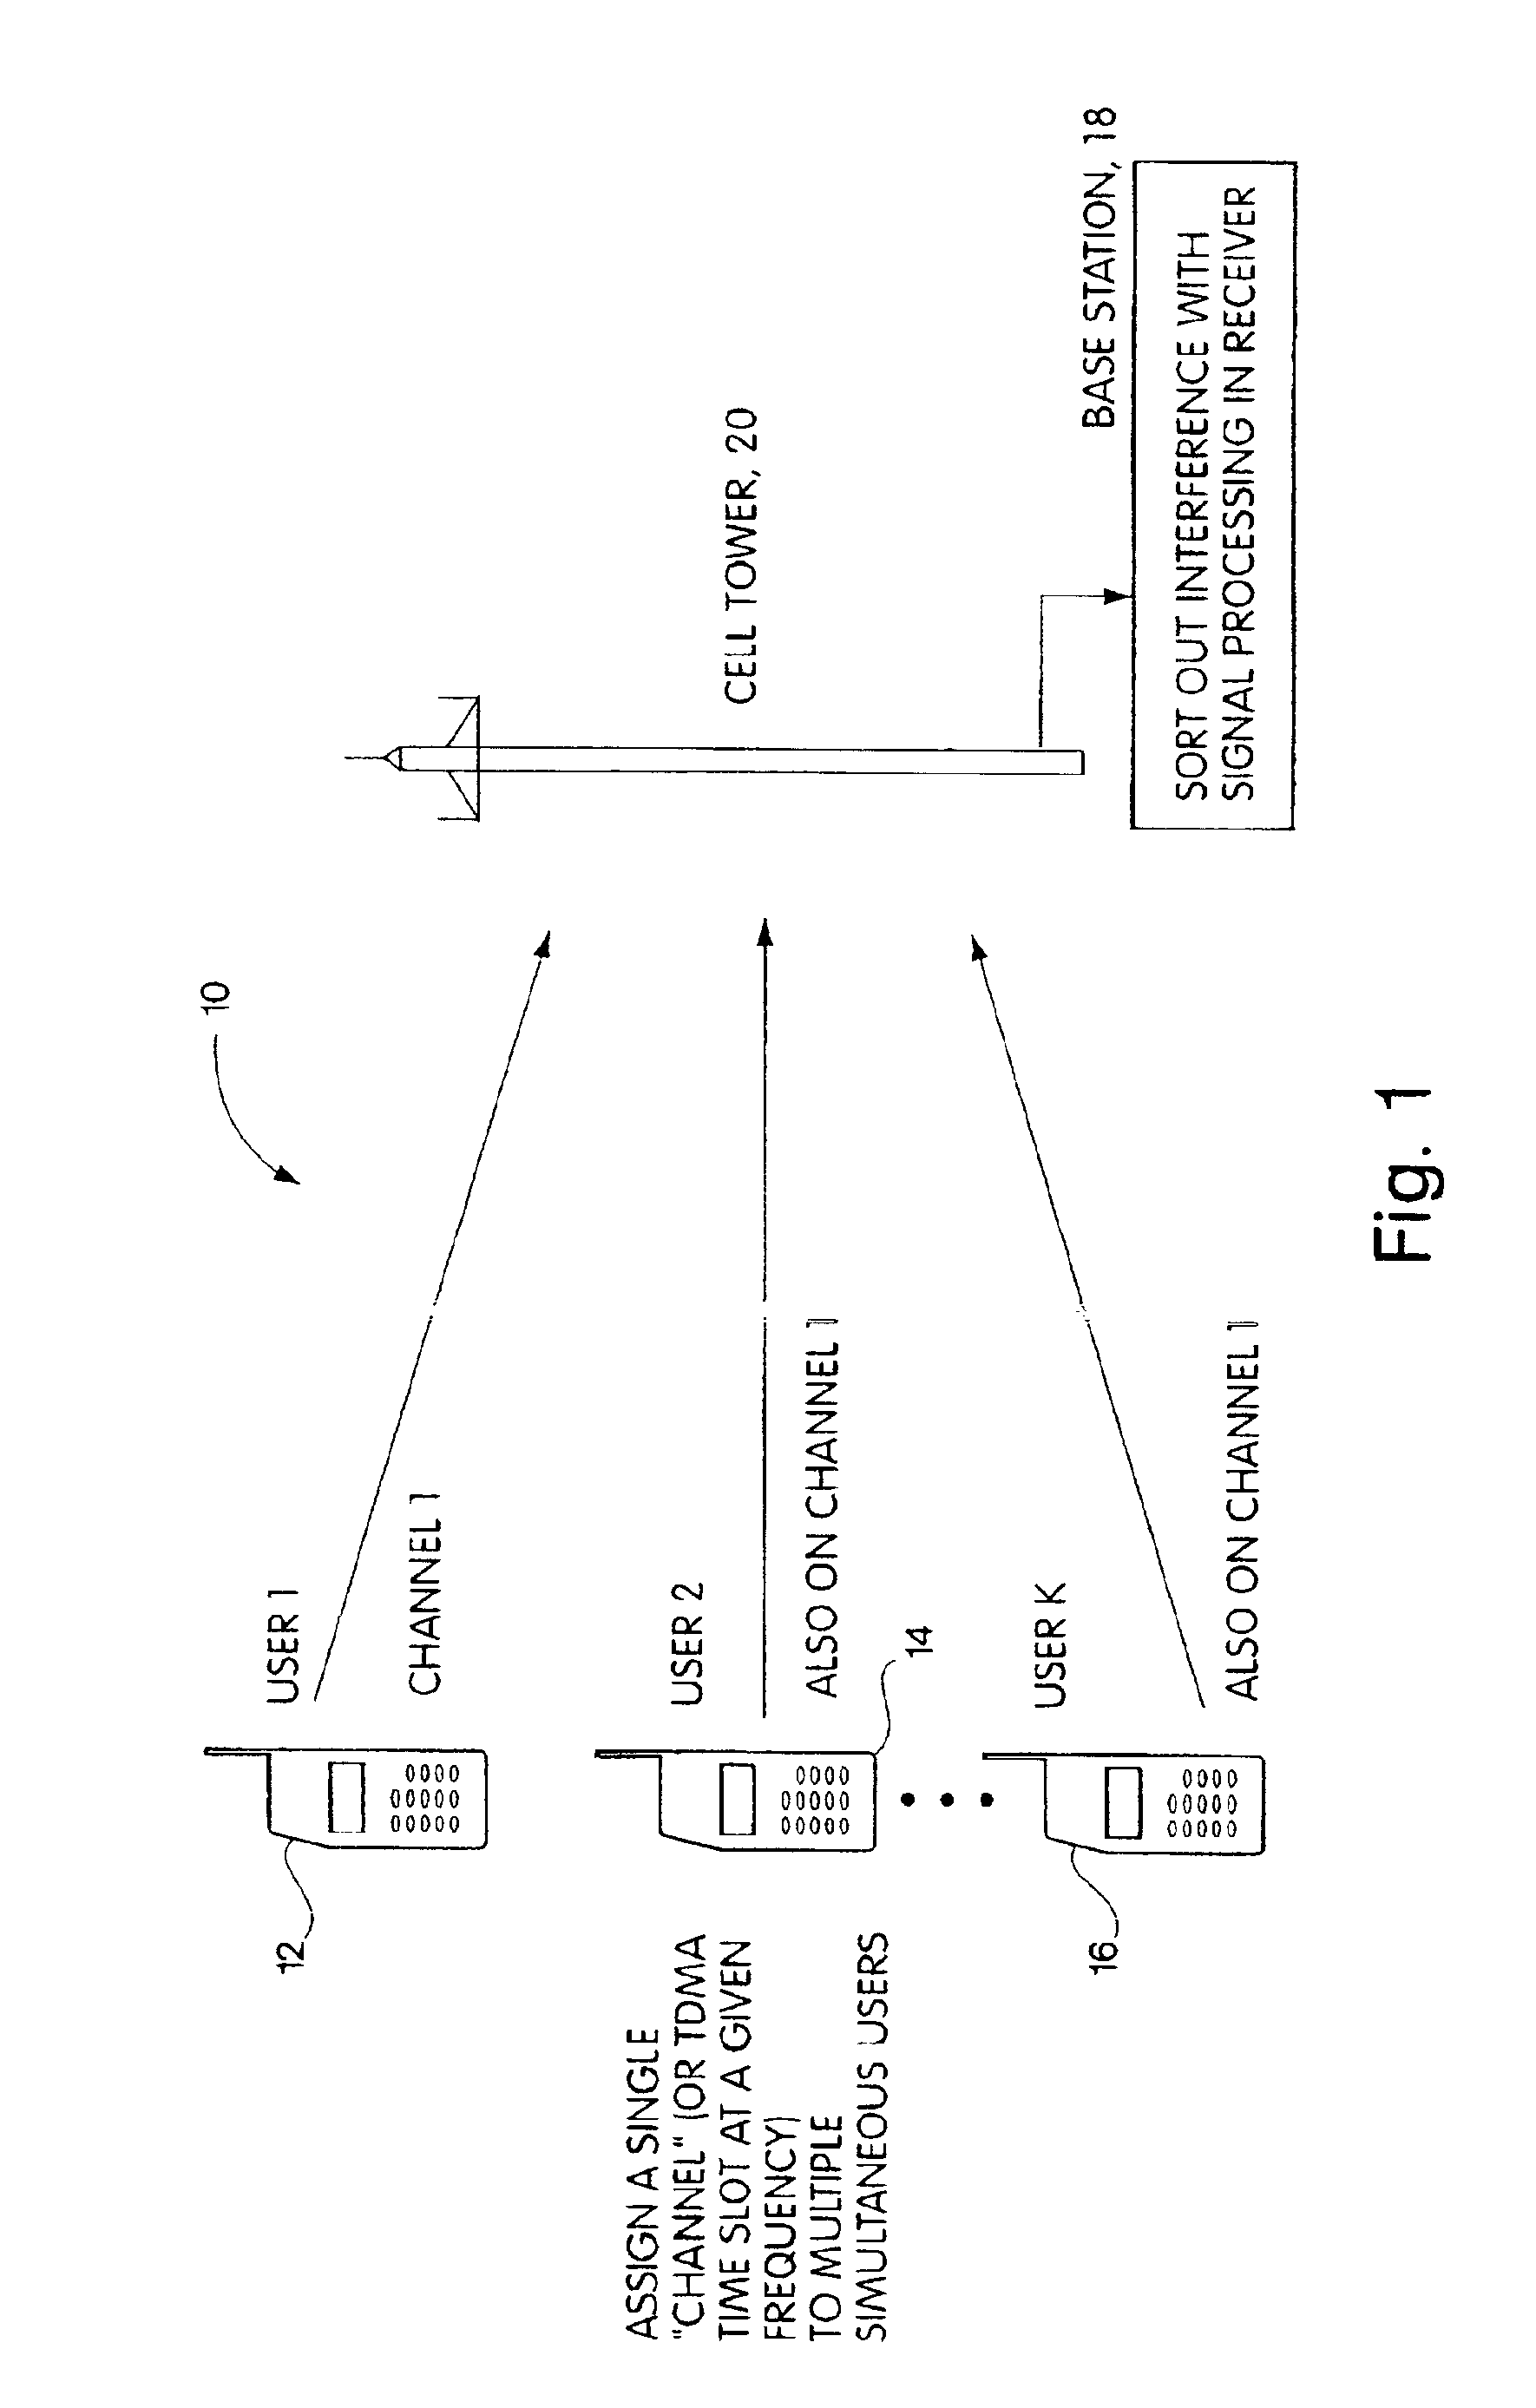 Method for overusing frequencies to permit simultaneous transmission of signals from two or more users on the same frequency and time slot